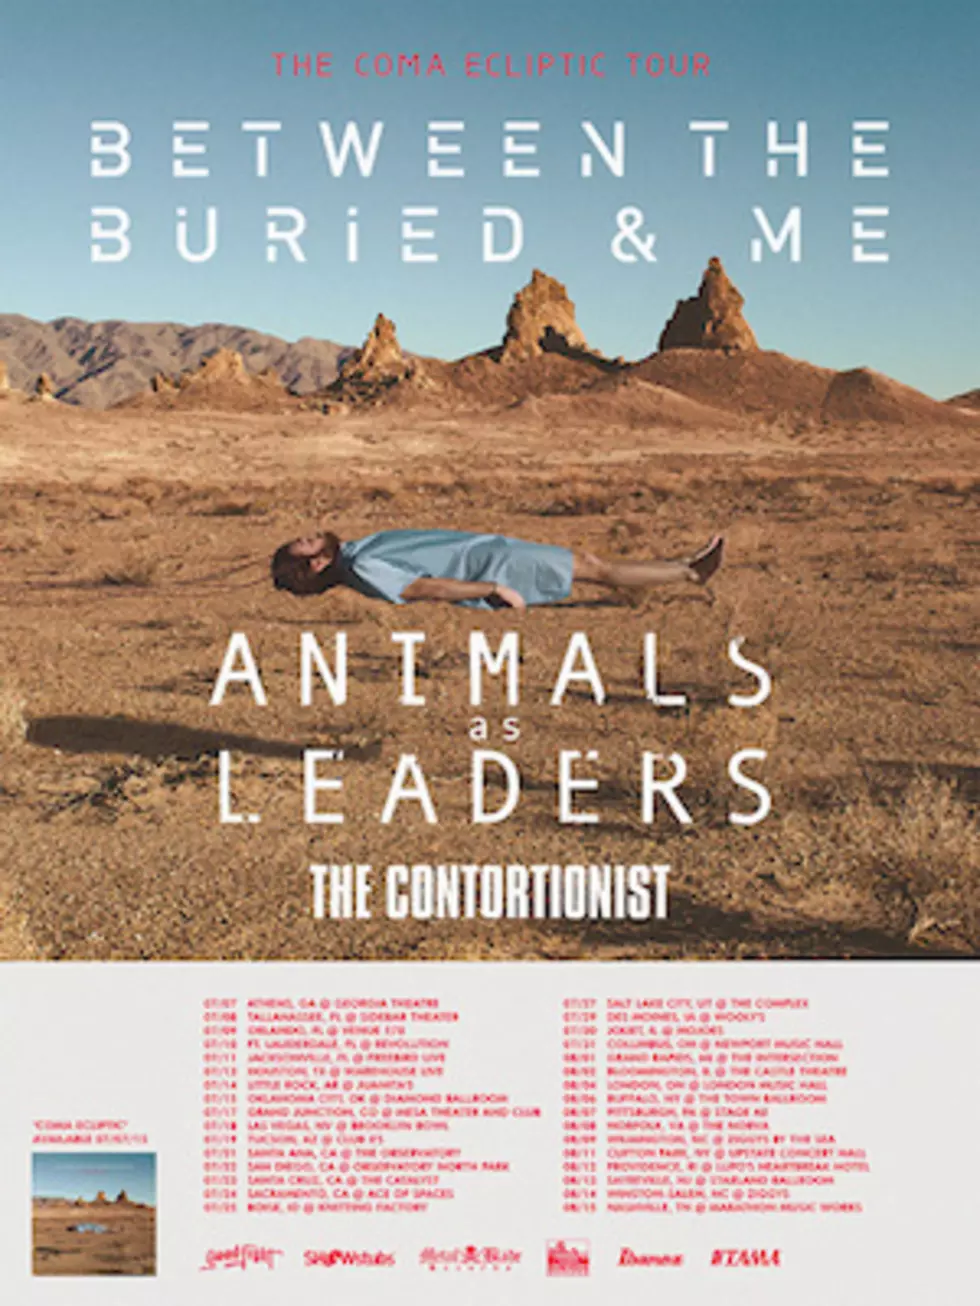 between the buried and me tour dates